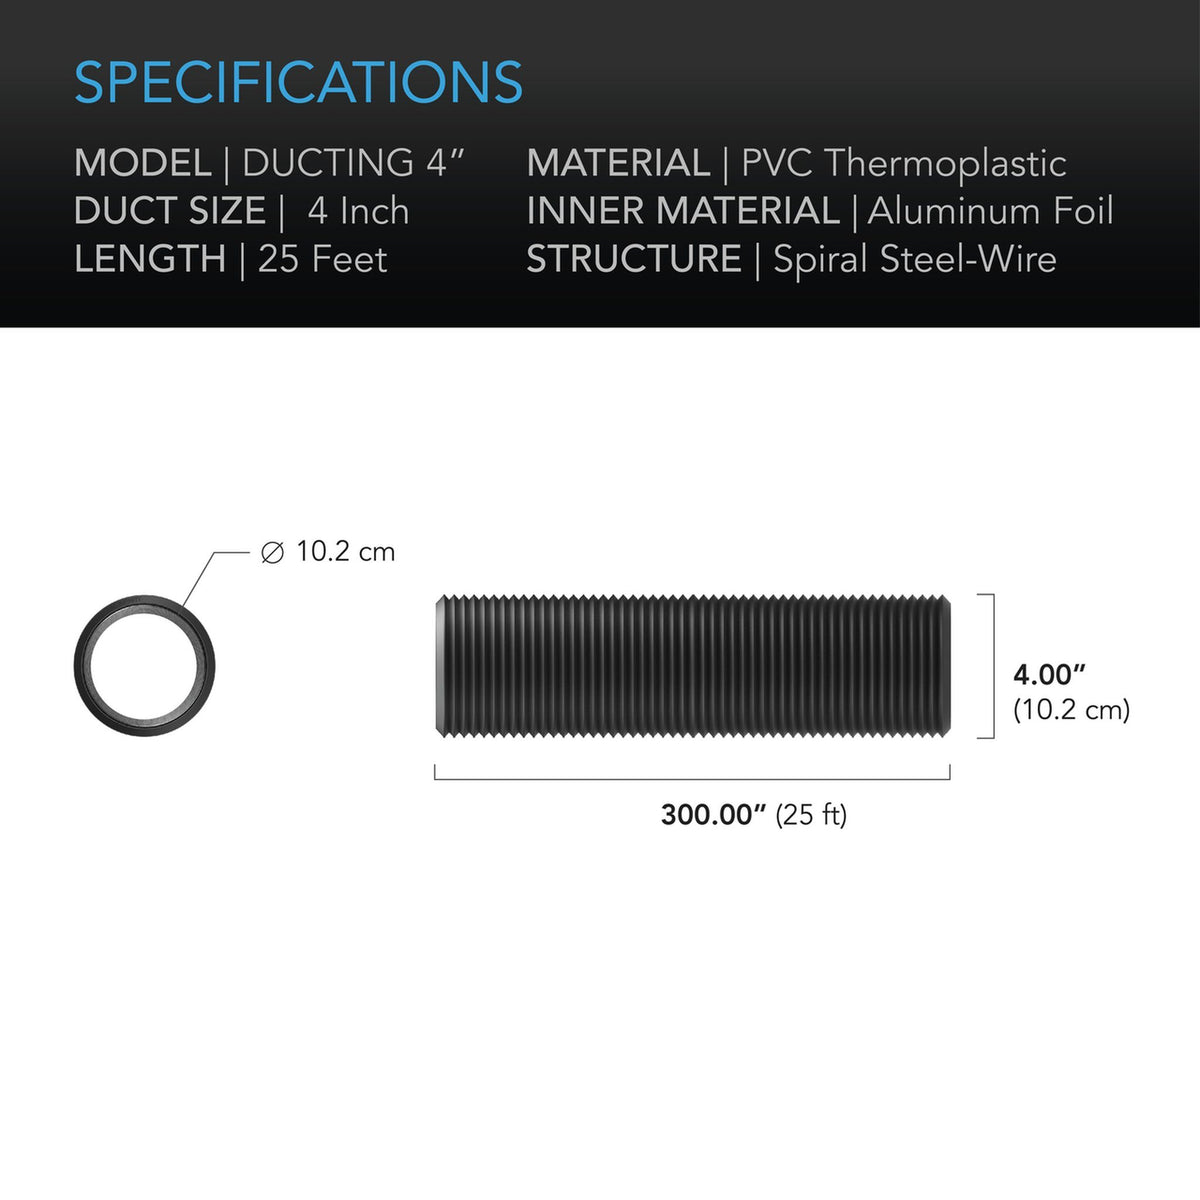 Ducting 4 inch specifications